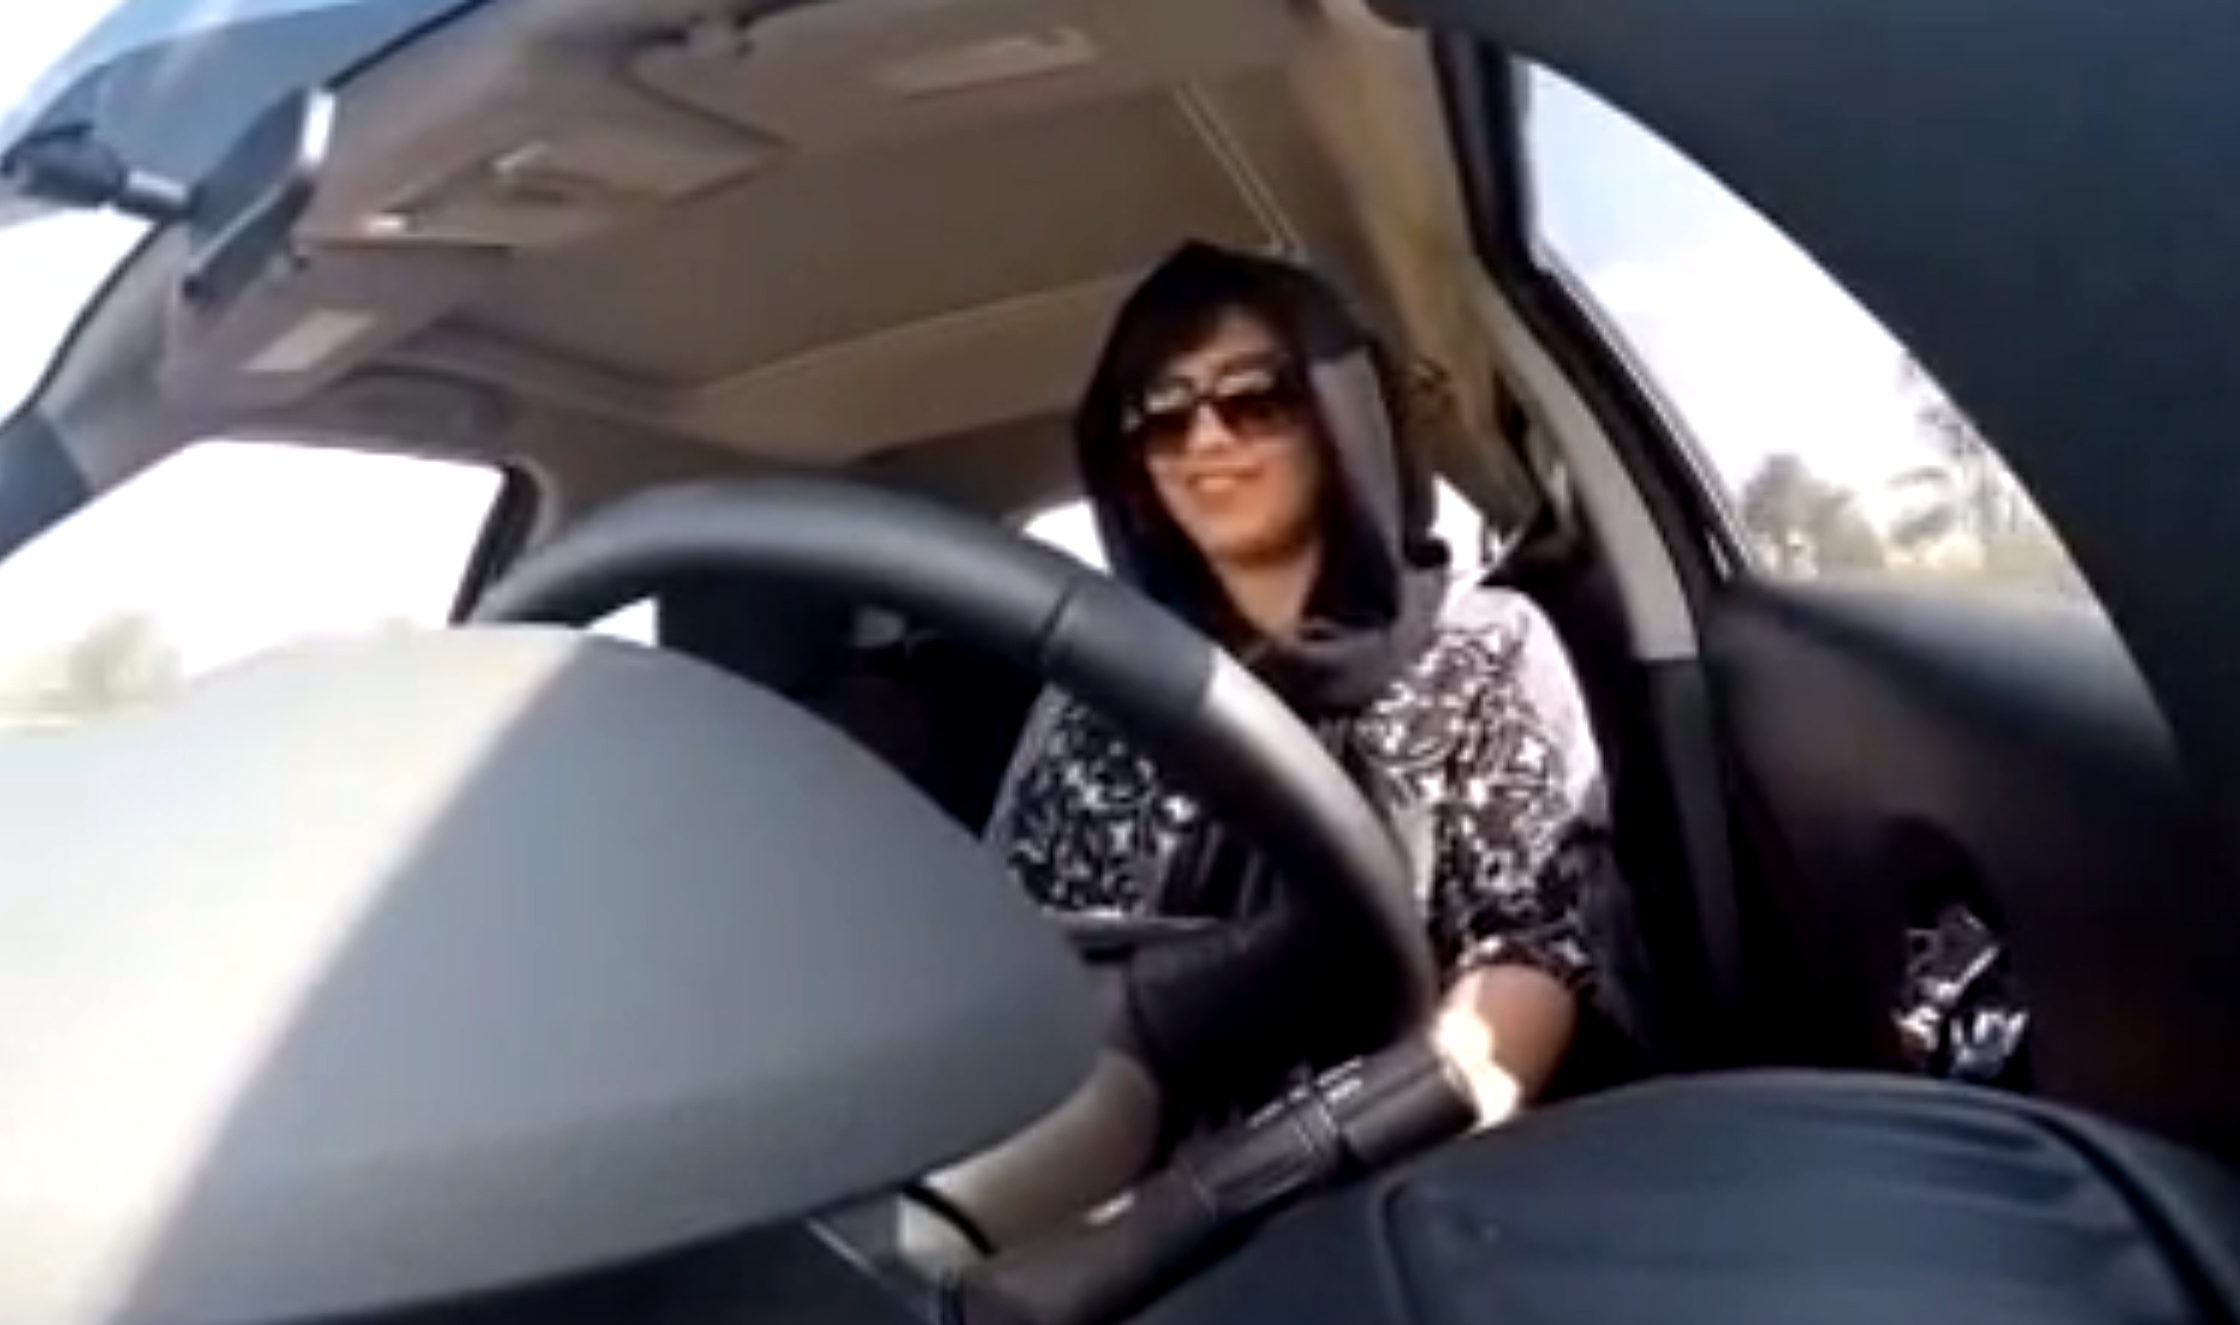 This Nov. 30, 2014, image made from video released by Loujain al-Hathloul, shows her driving toward the United Arab Emirates–Saudi Arabia border before her arrest on Dec. 1, 2014, in Saudi Arabia (Loujain al-Hathloul—AP)